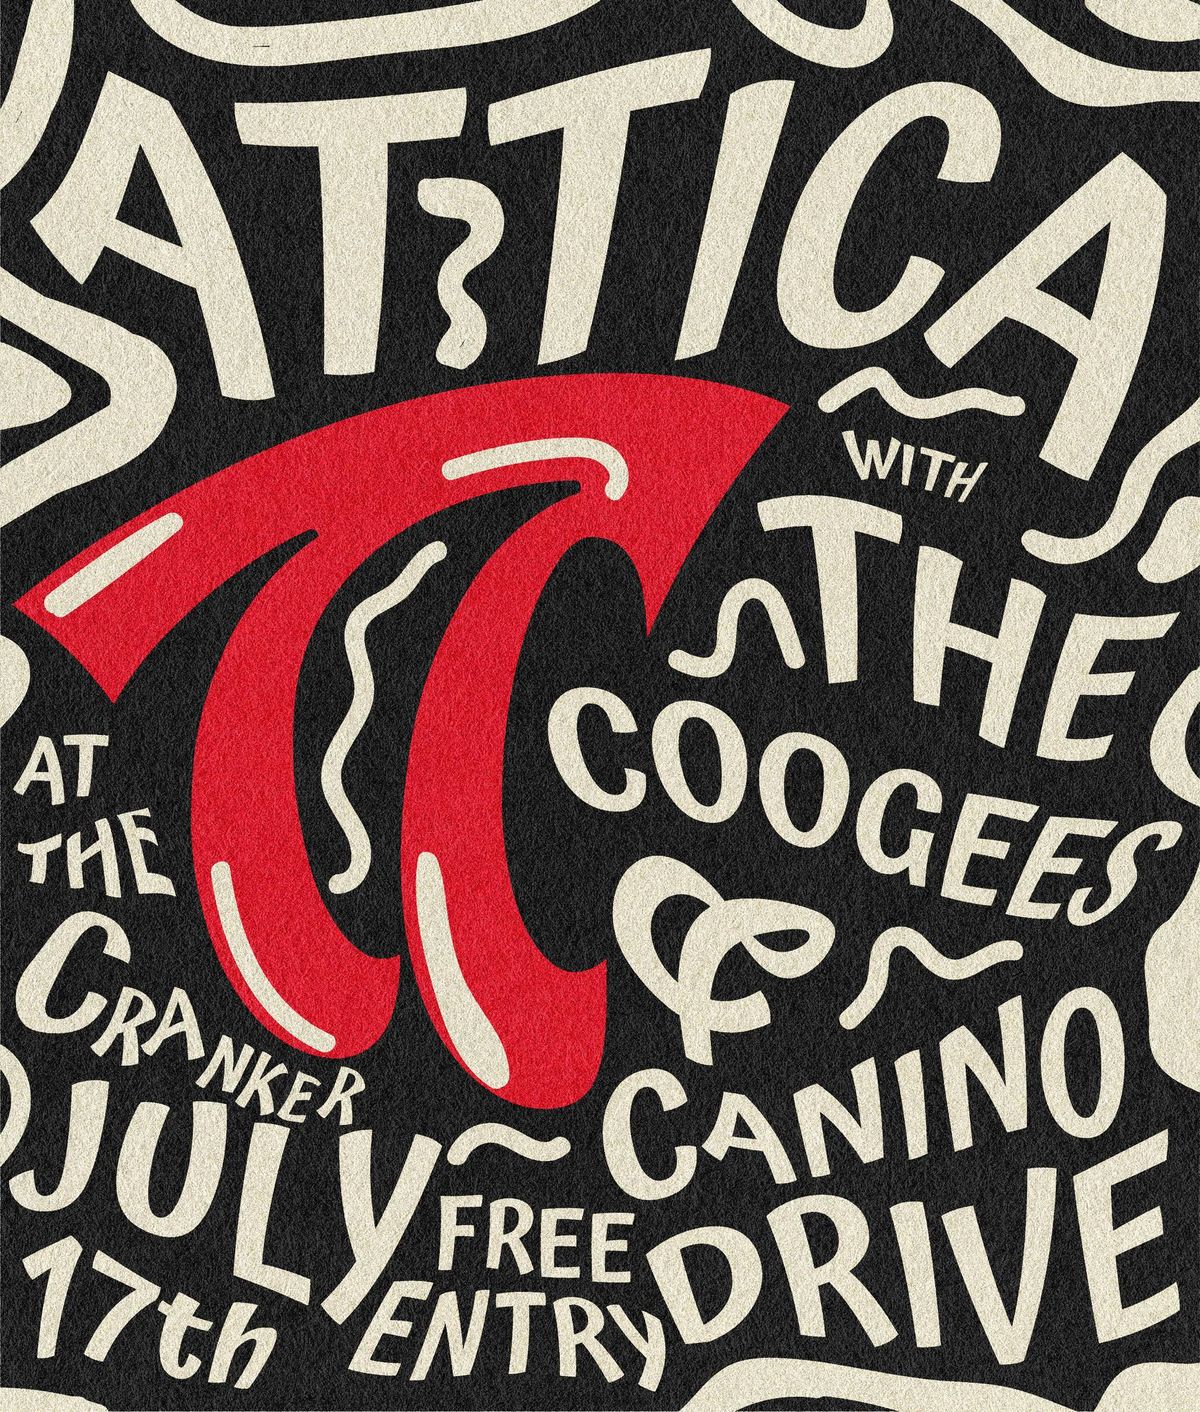 ATTICA at the Cranker with The Coogees & Canino Drive